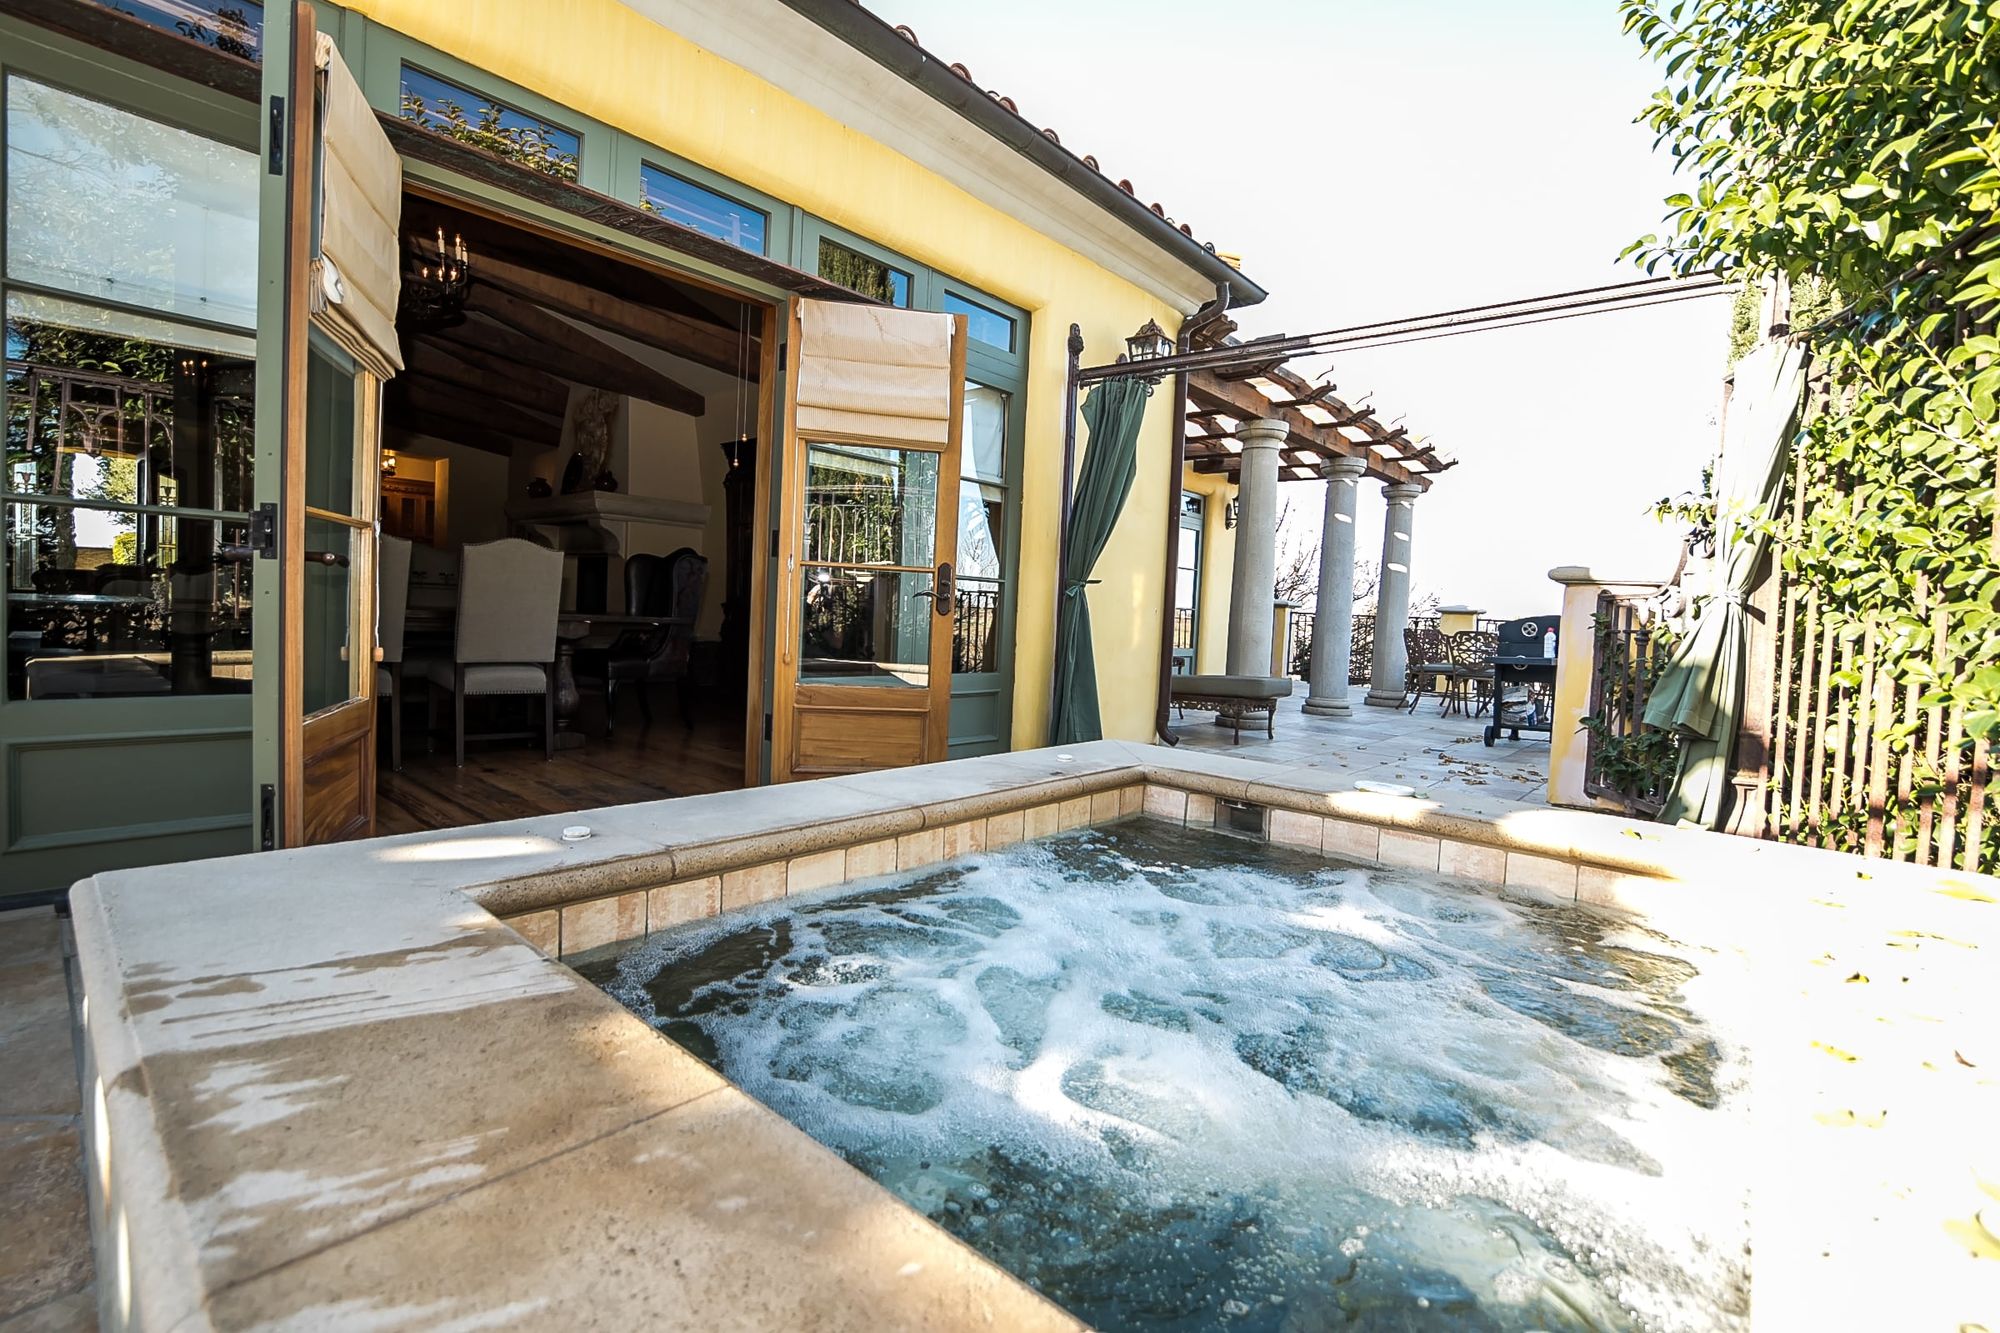 Hot tub bubbling on patio outside open French doors